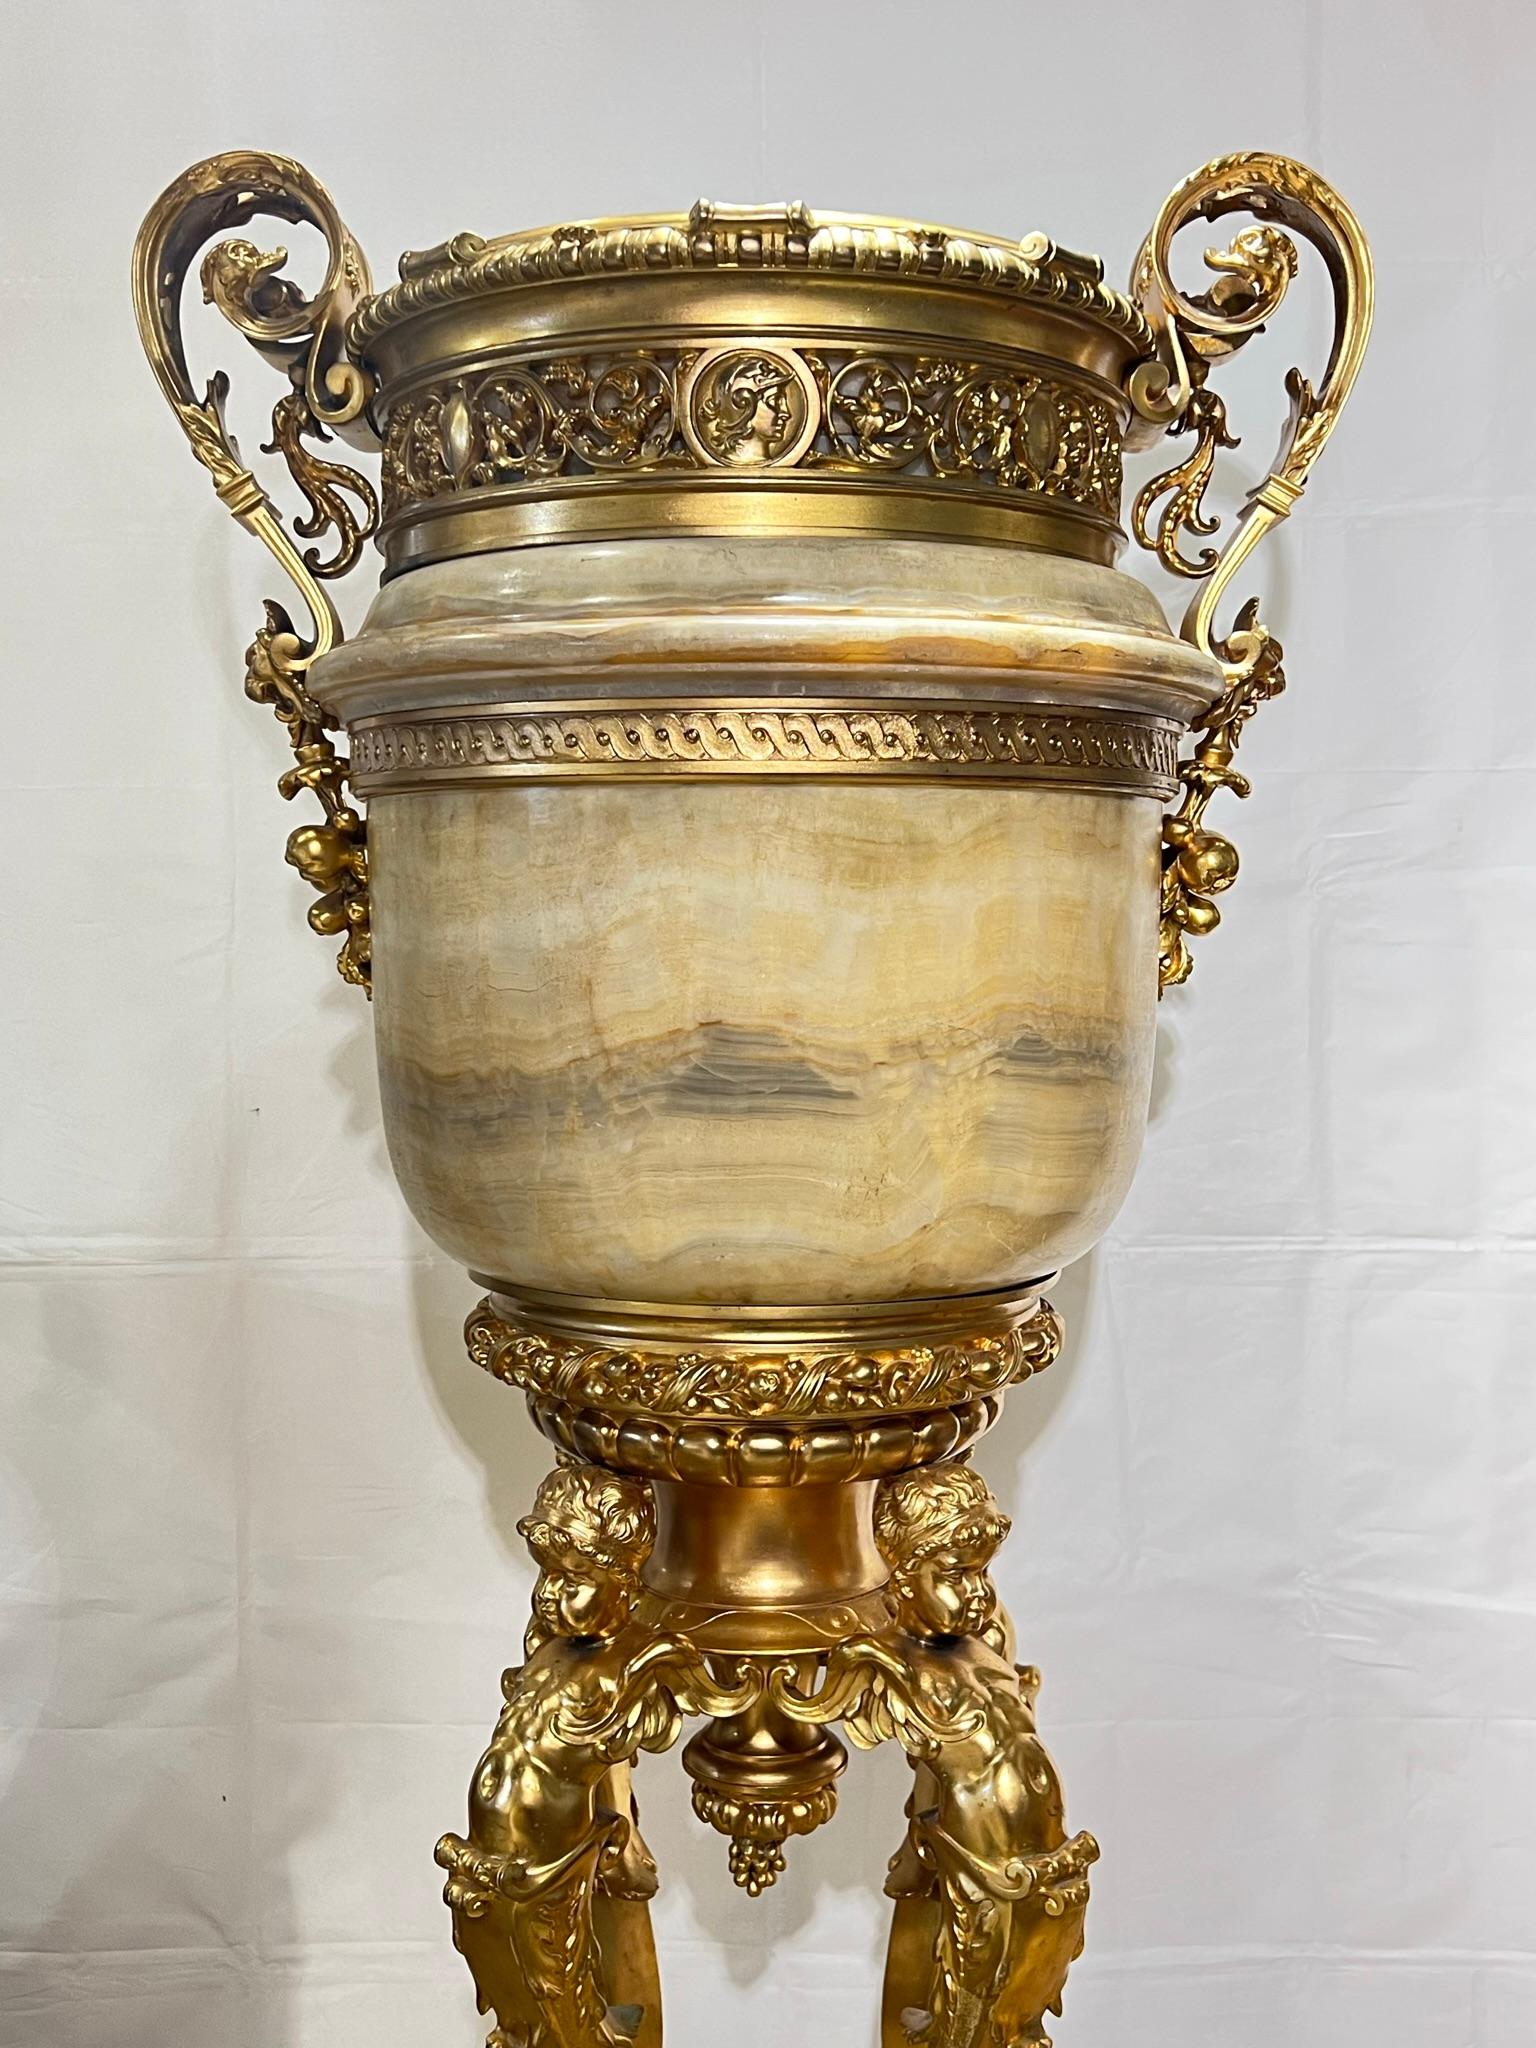 Neoclassical Revival Monumental 19th Century French Neoclassical Onyx and Gilt Bronze Vase For Sale